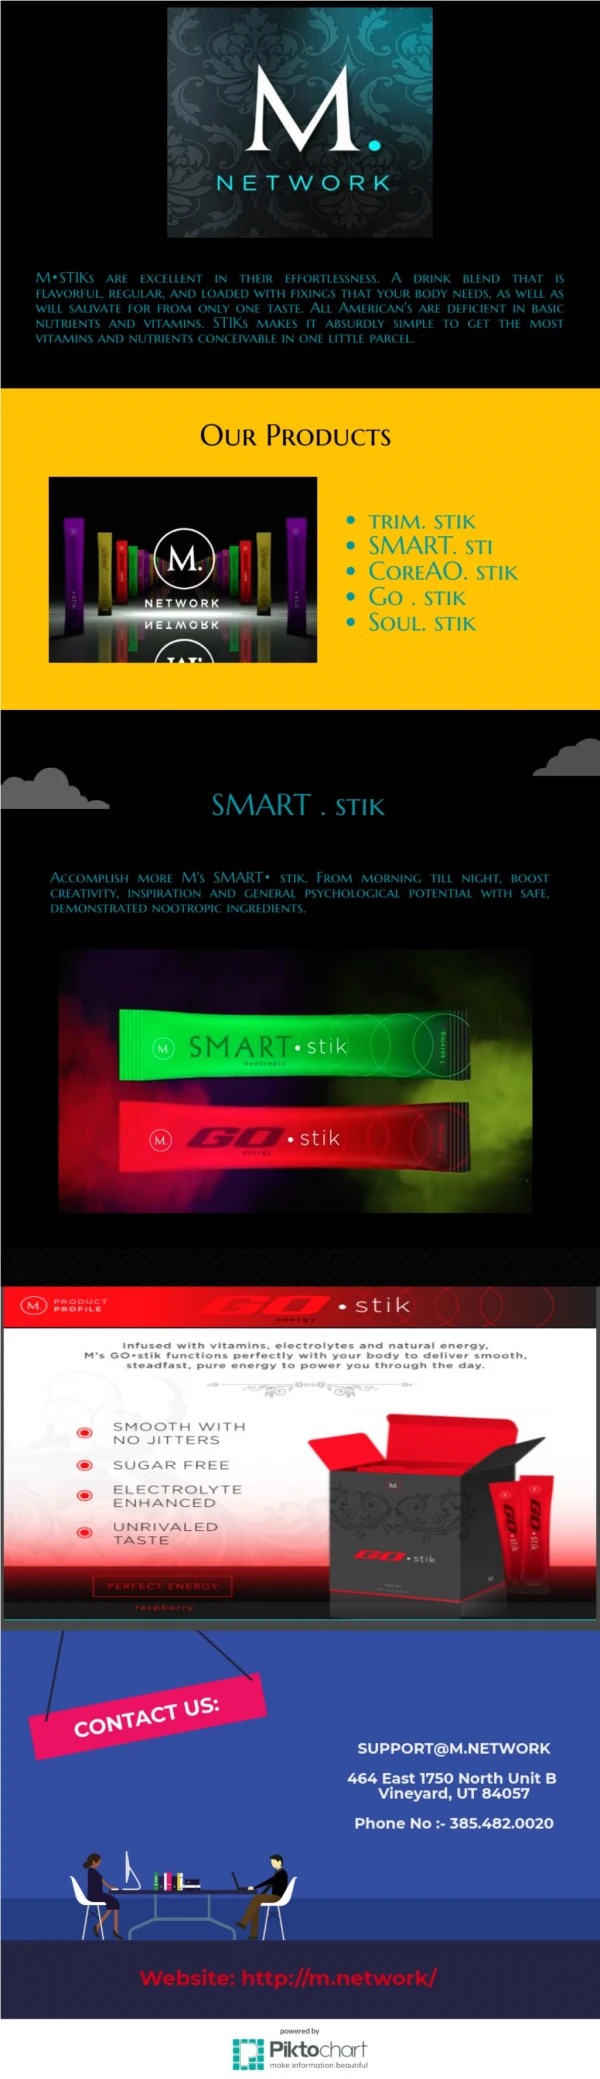 Boost Your Energy with Go Stik - M.Network